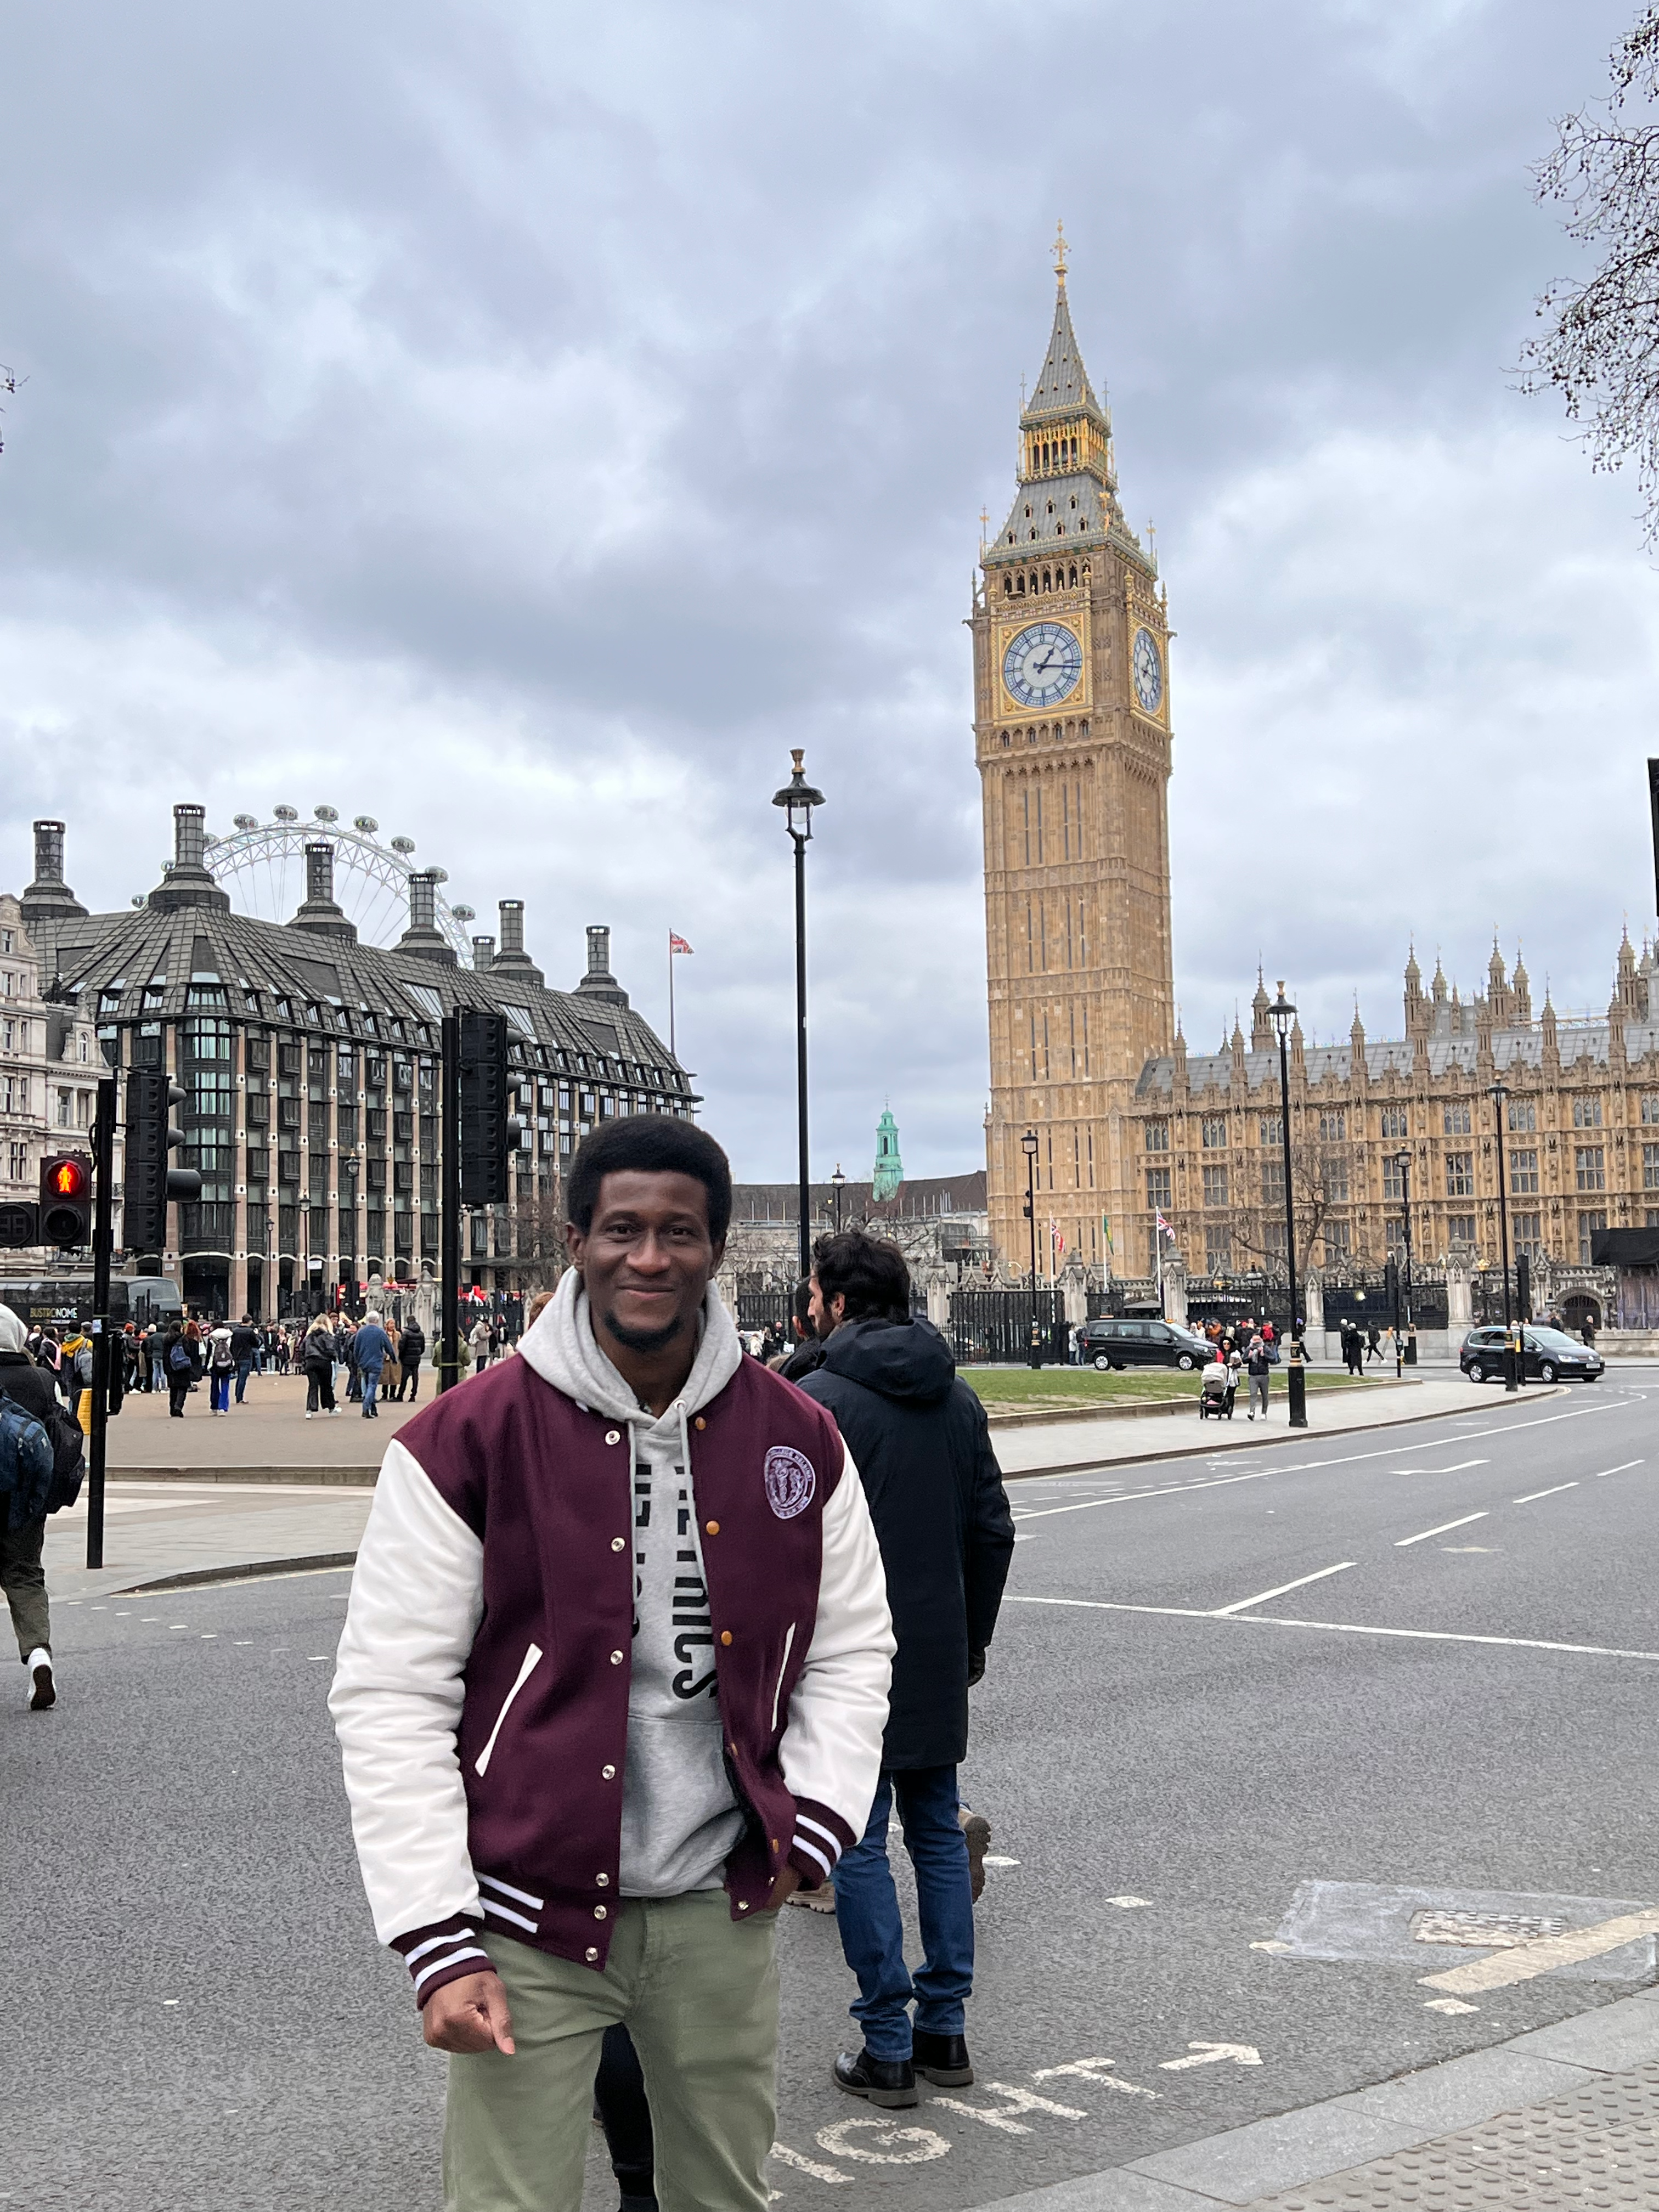 A man standing in the front of Big Ben